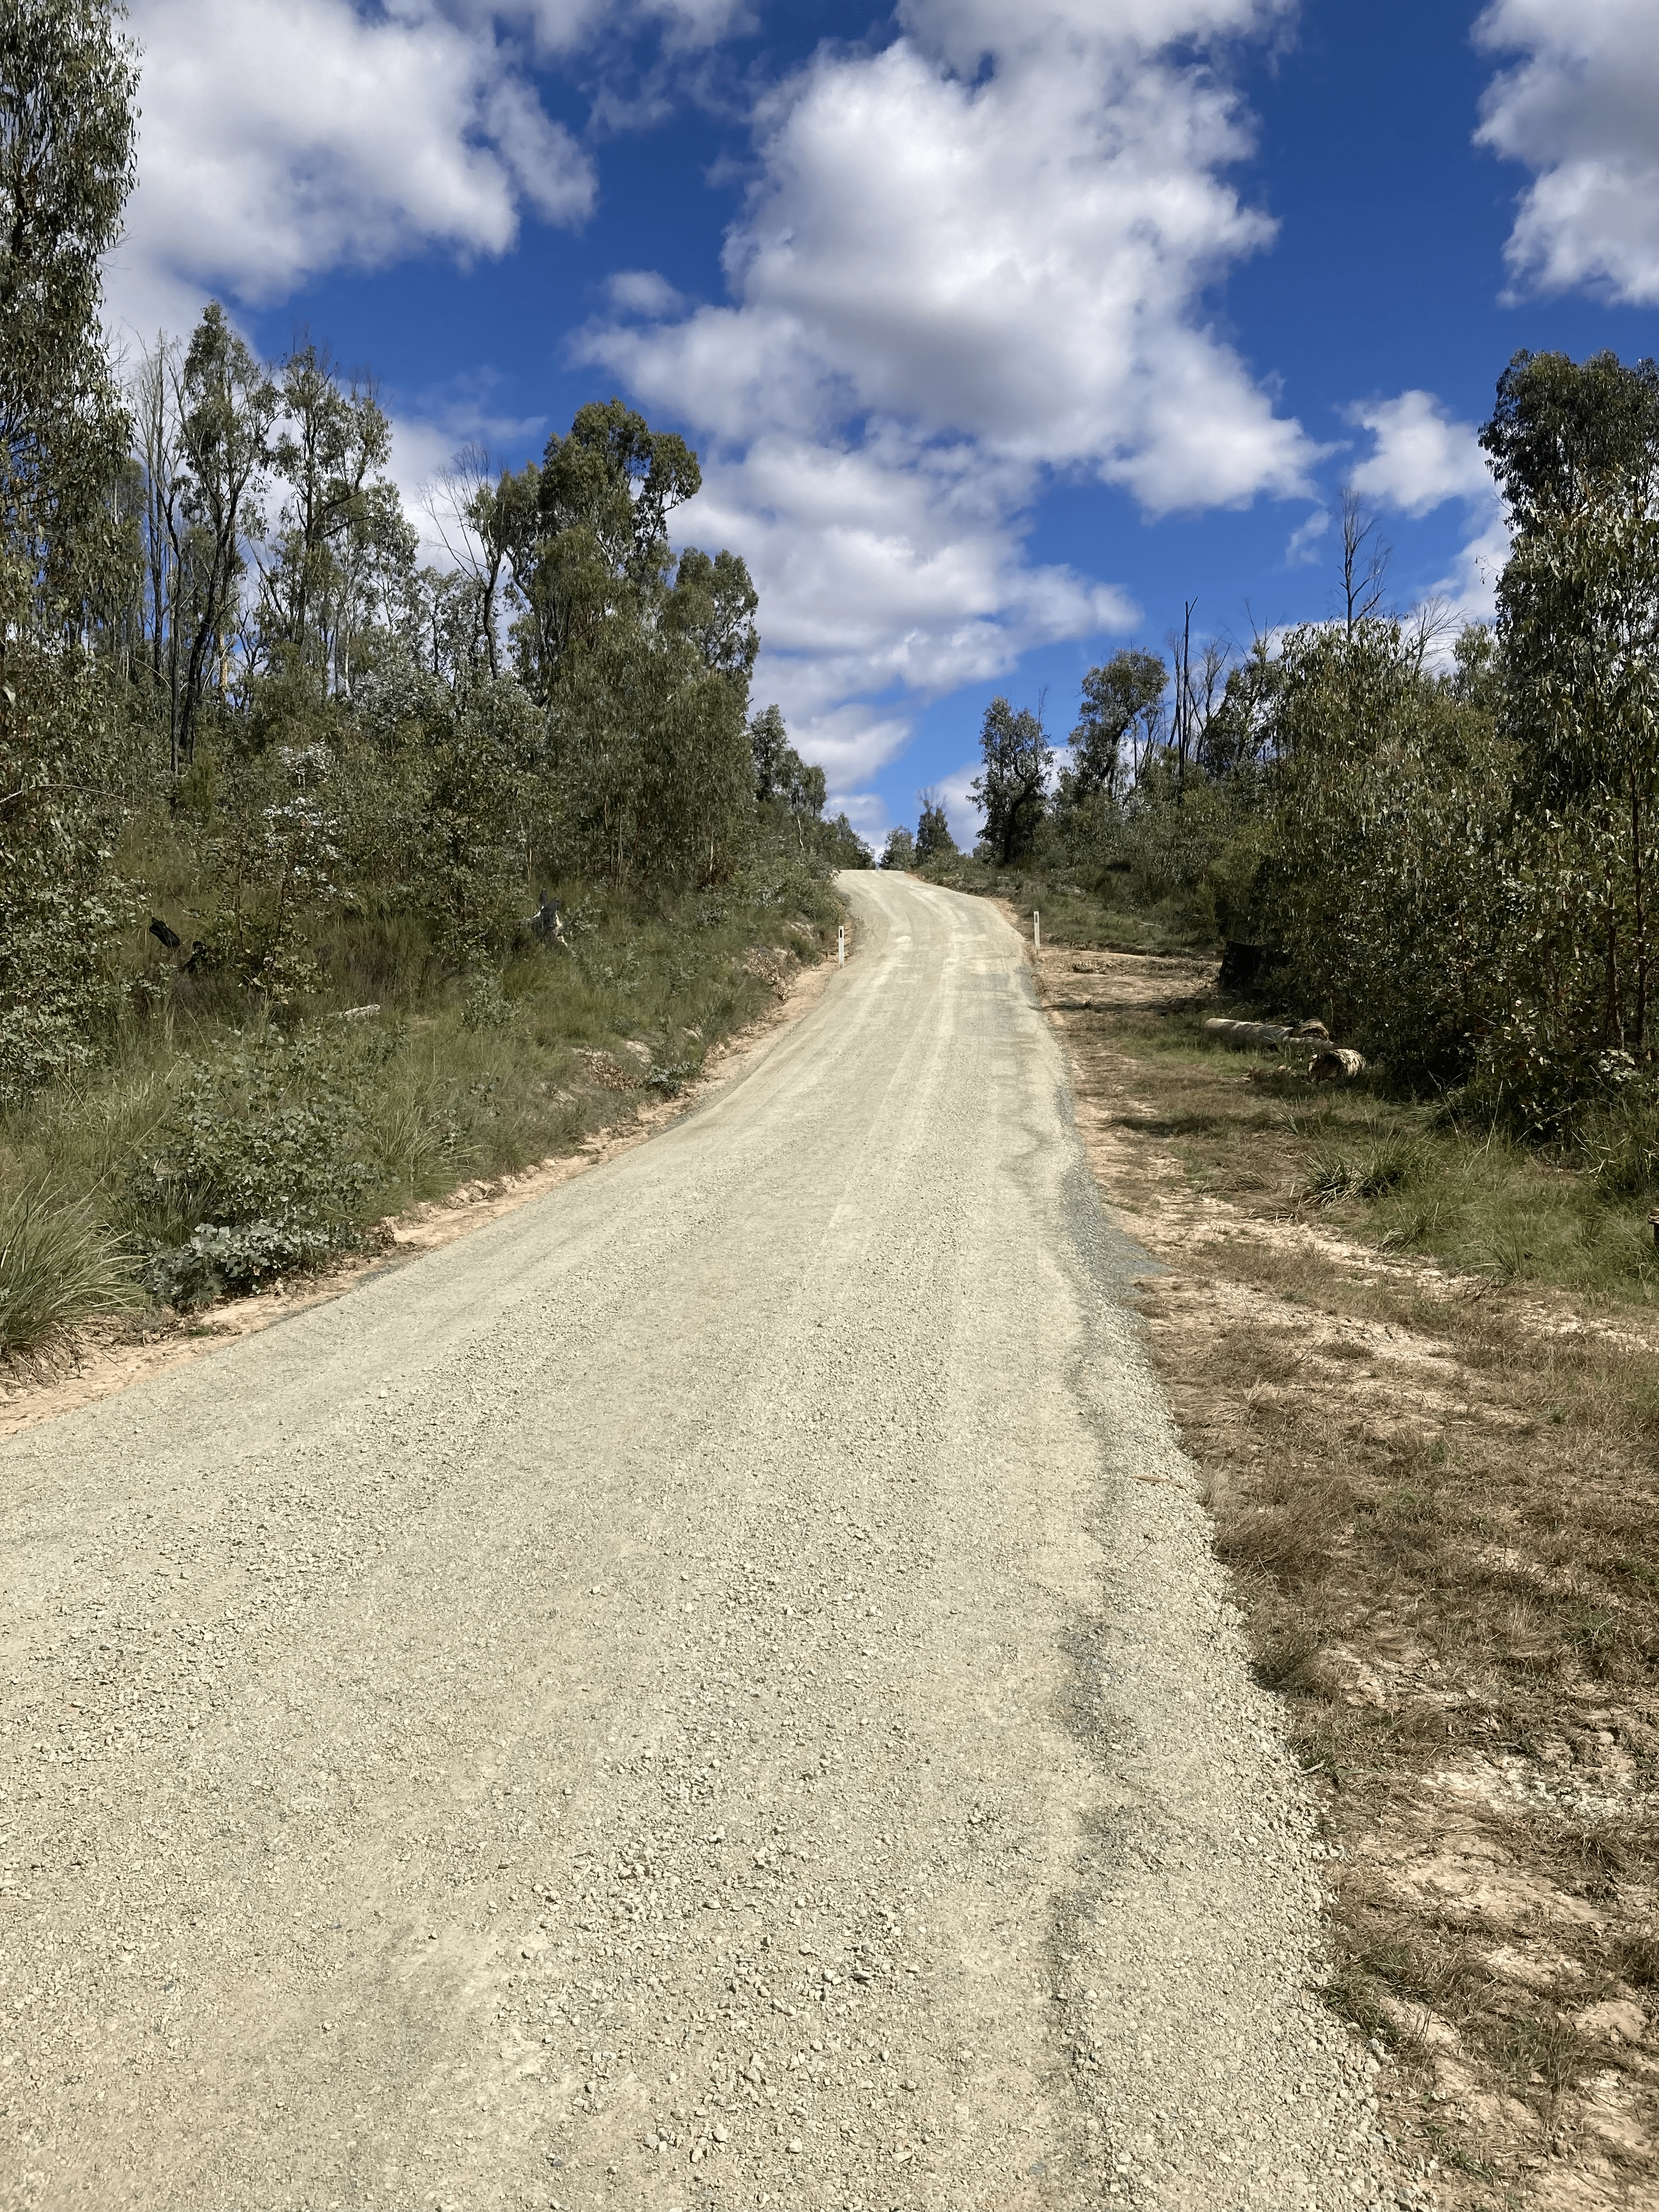 An unpaved road heading up a hill with a smooth, new surface